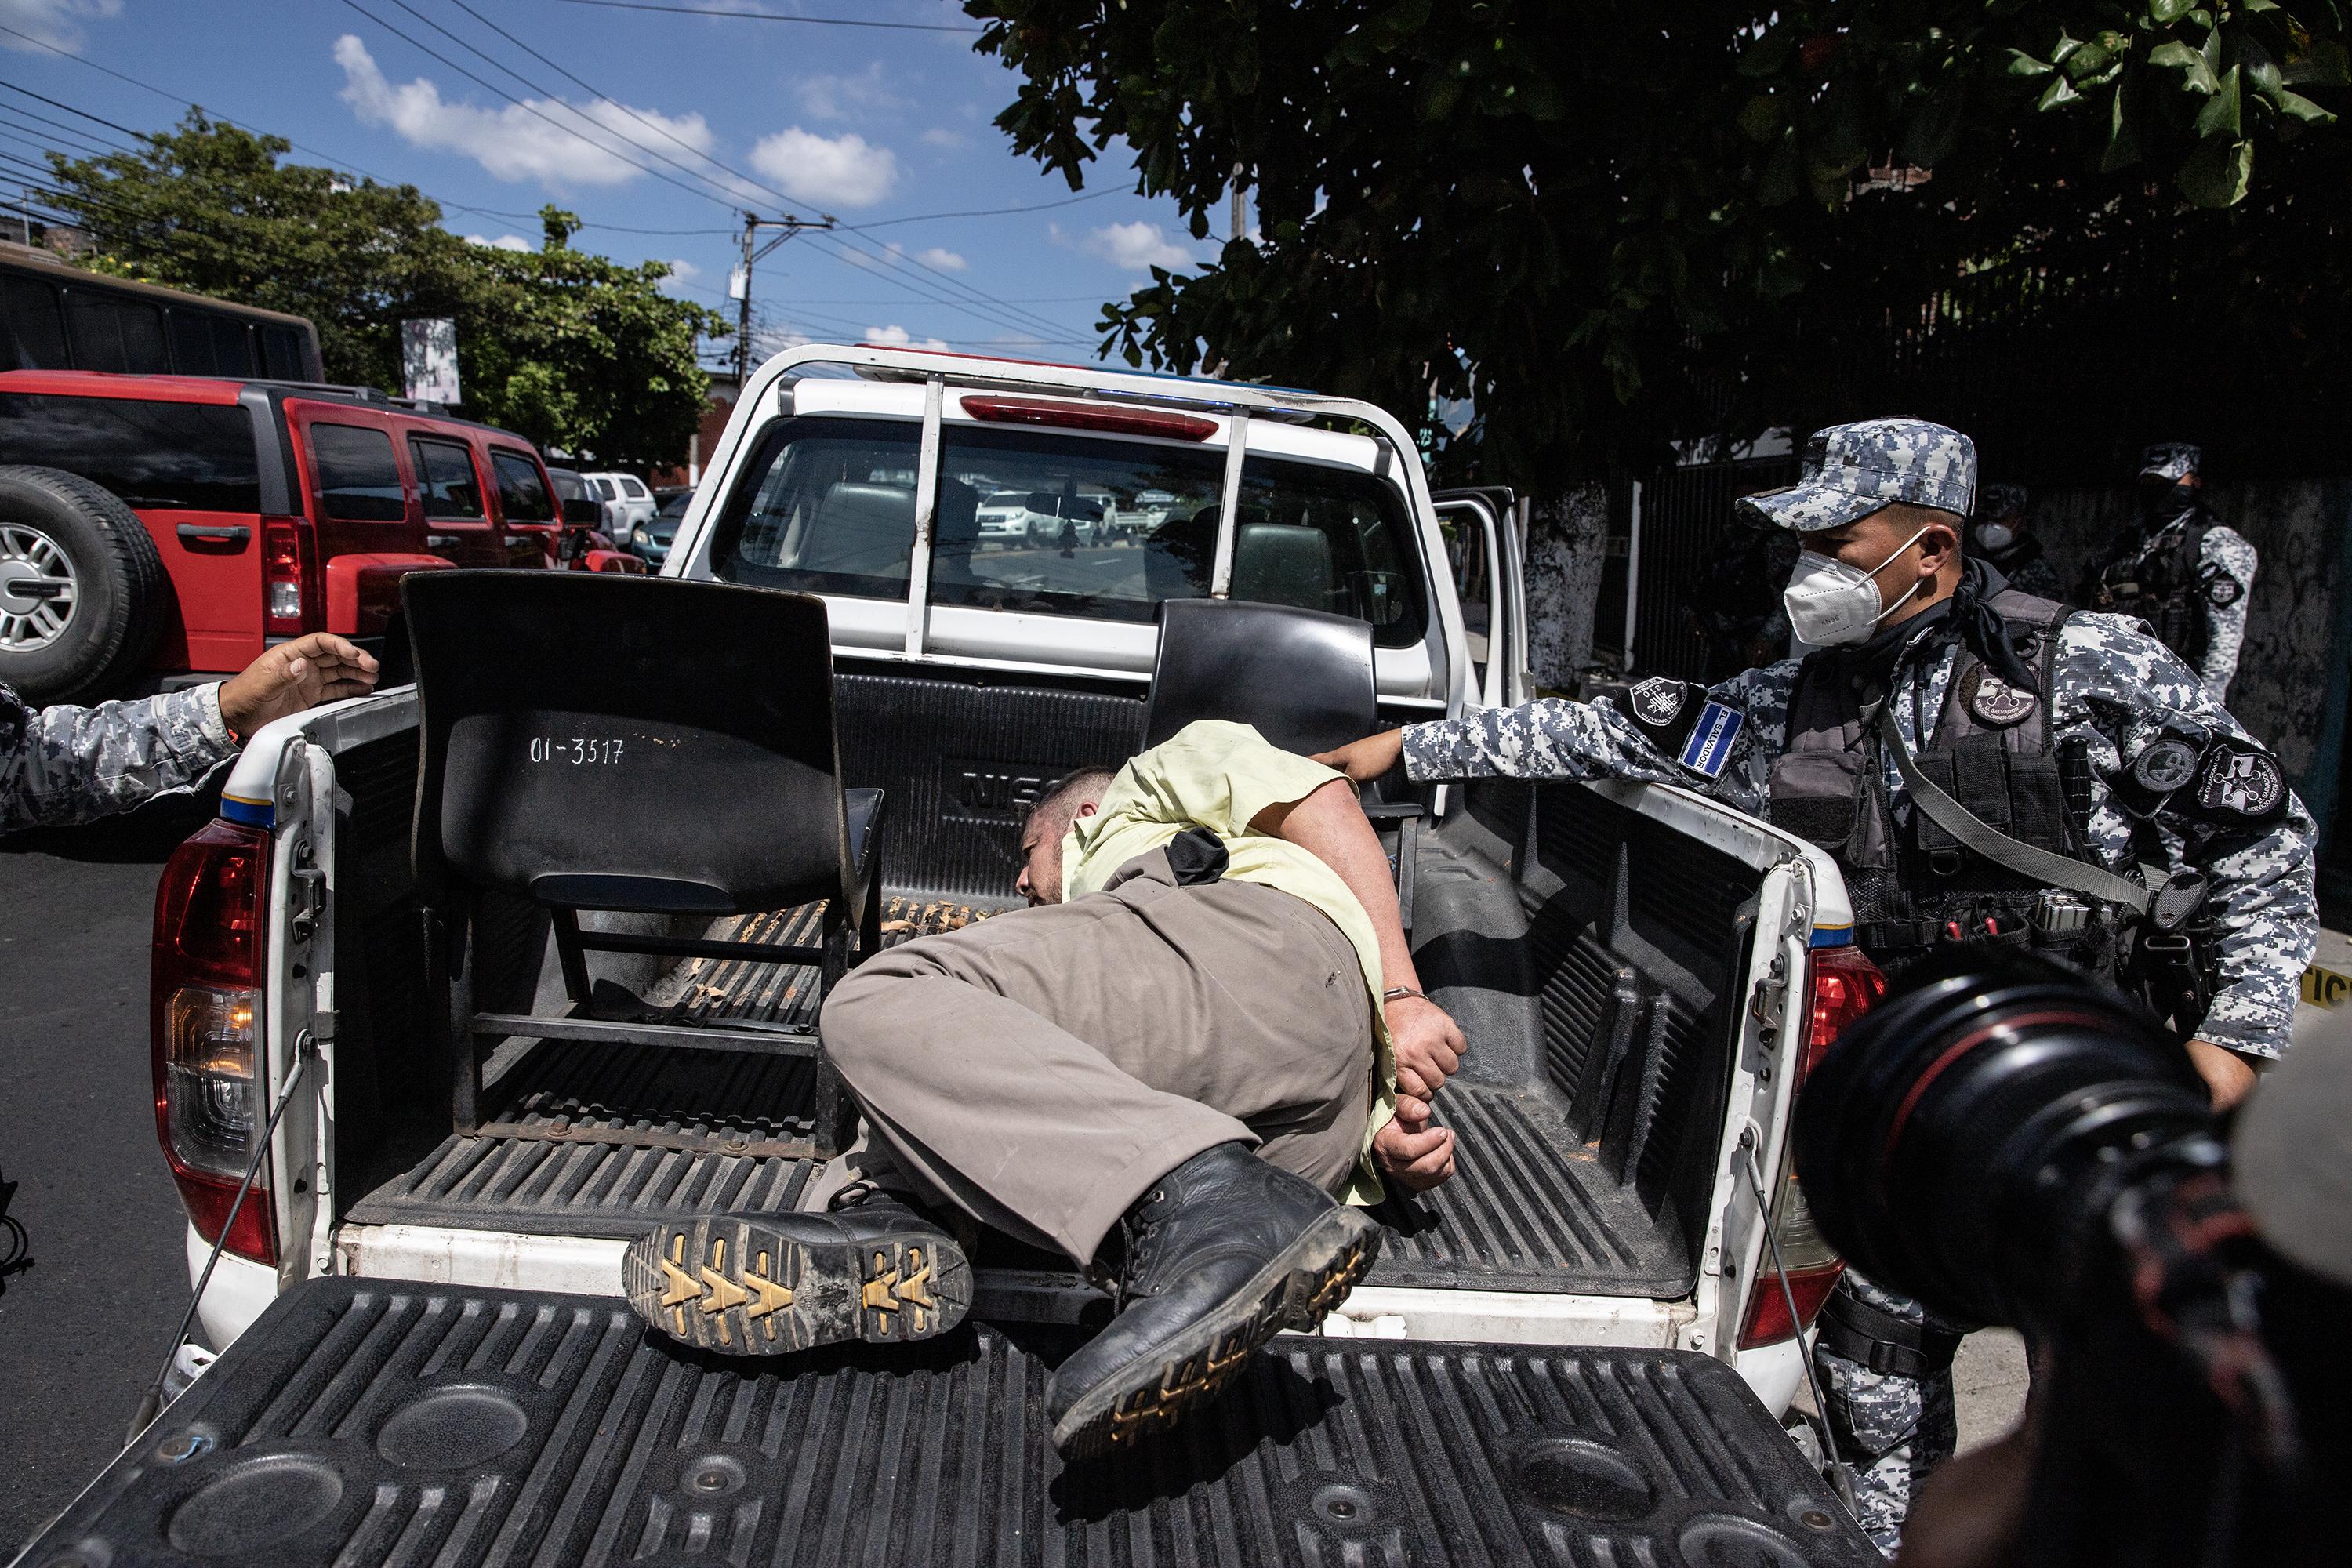 On November 11, 2021, a man was captured in the colonia La Coruña, Soyapango, suspected of committing a murder on bus route 306. The arrest was made during a three-day massacre of 45 people. Photo: Carlos Barrera/El Faro